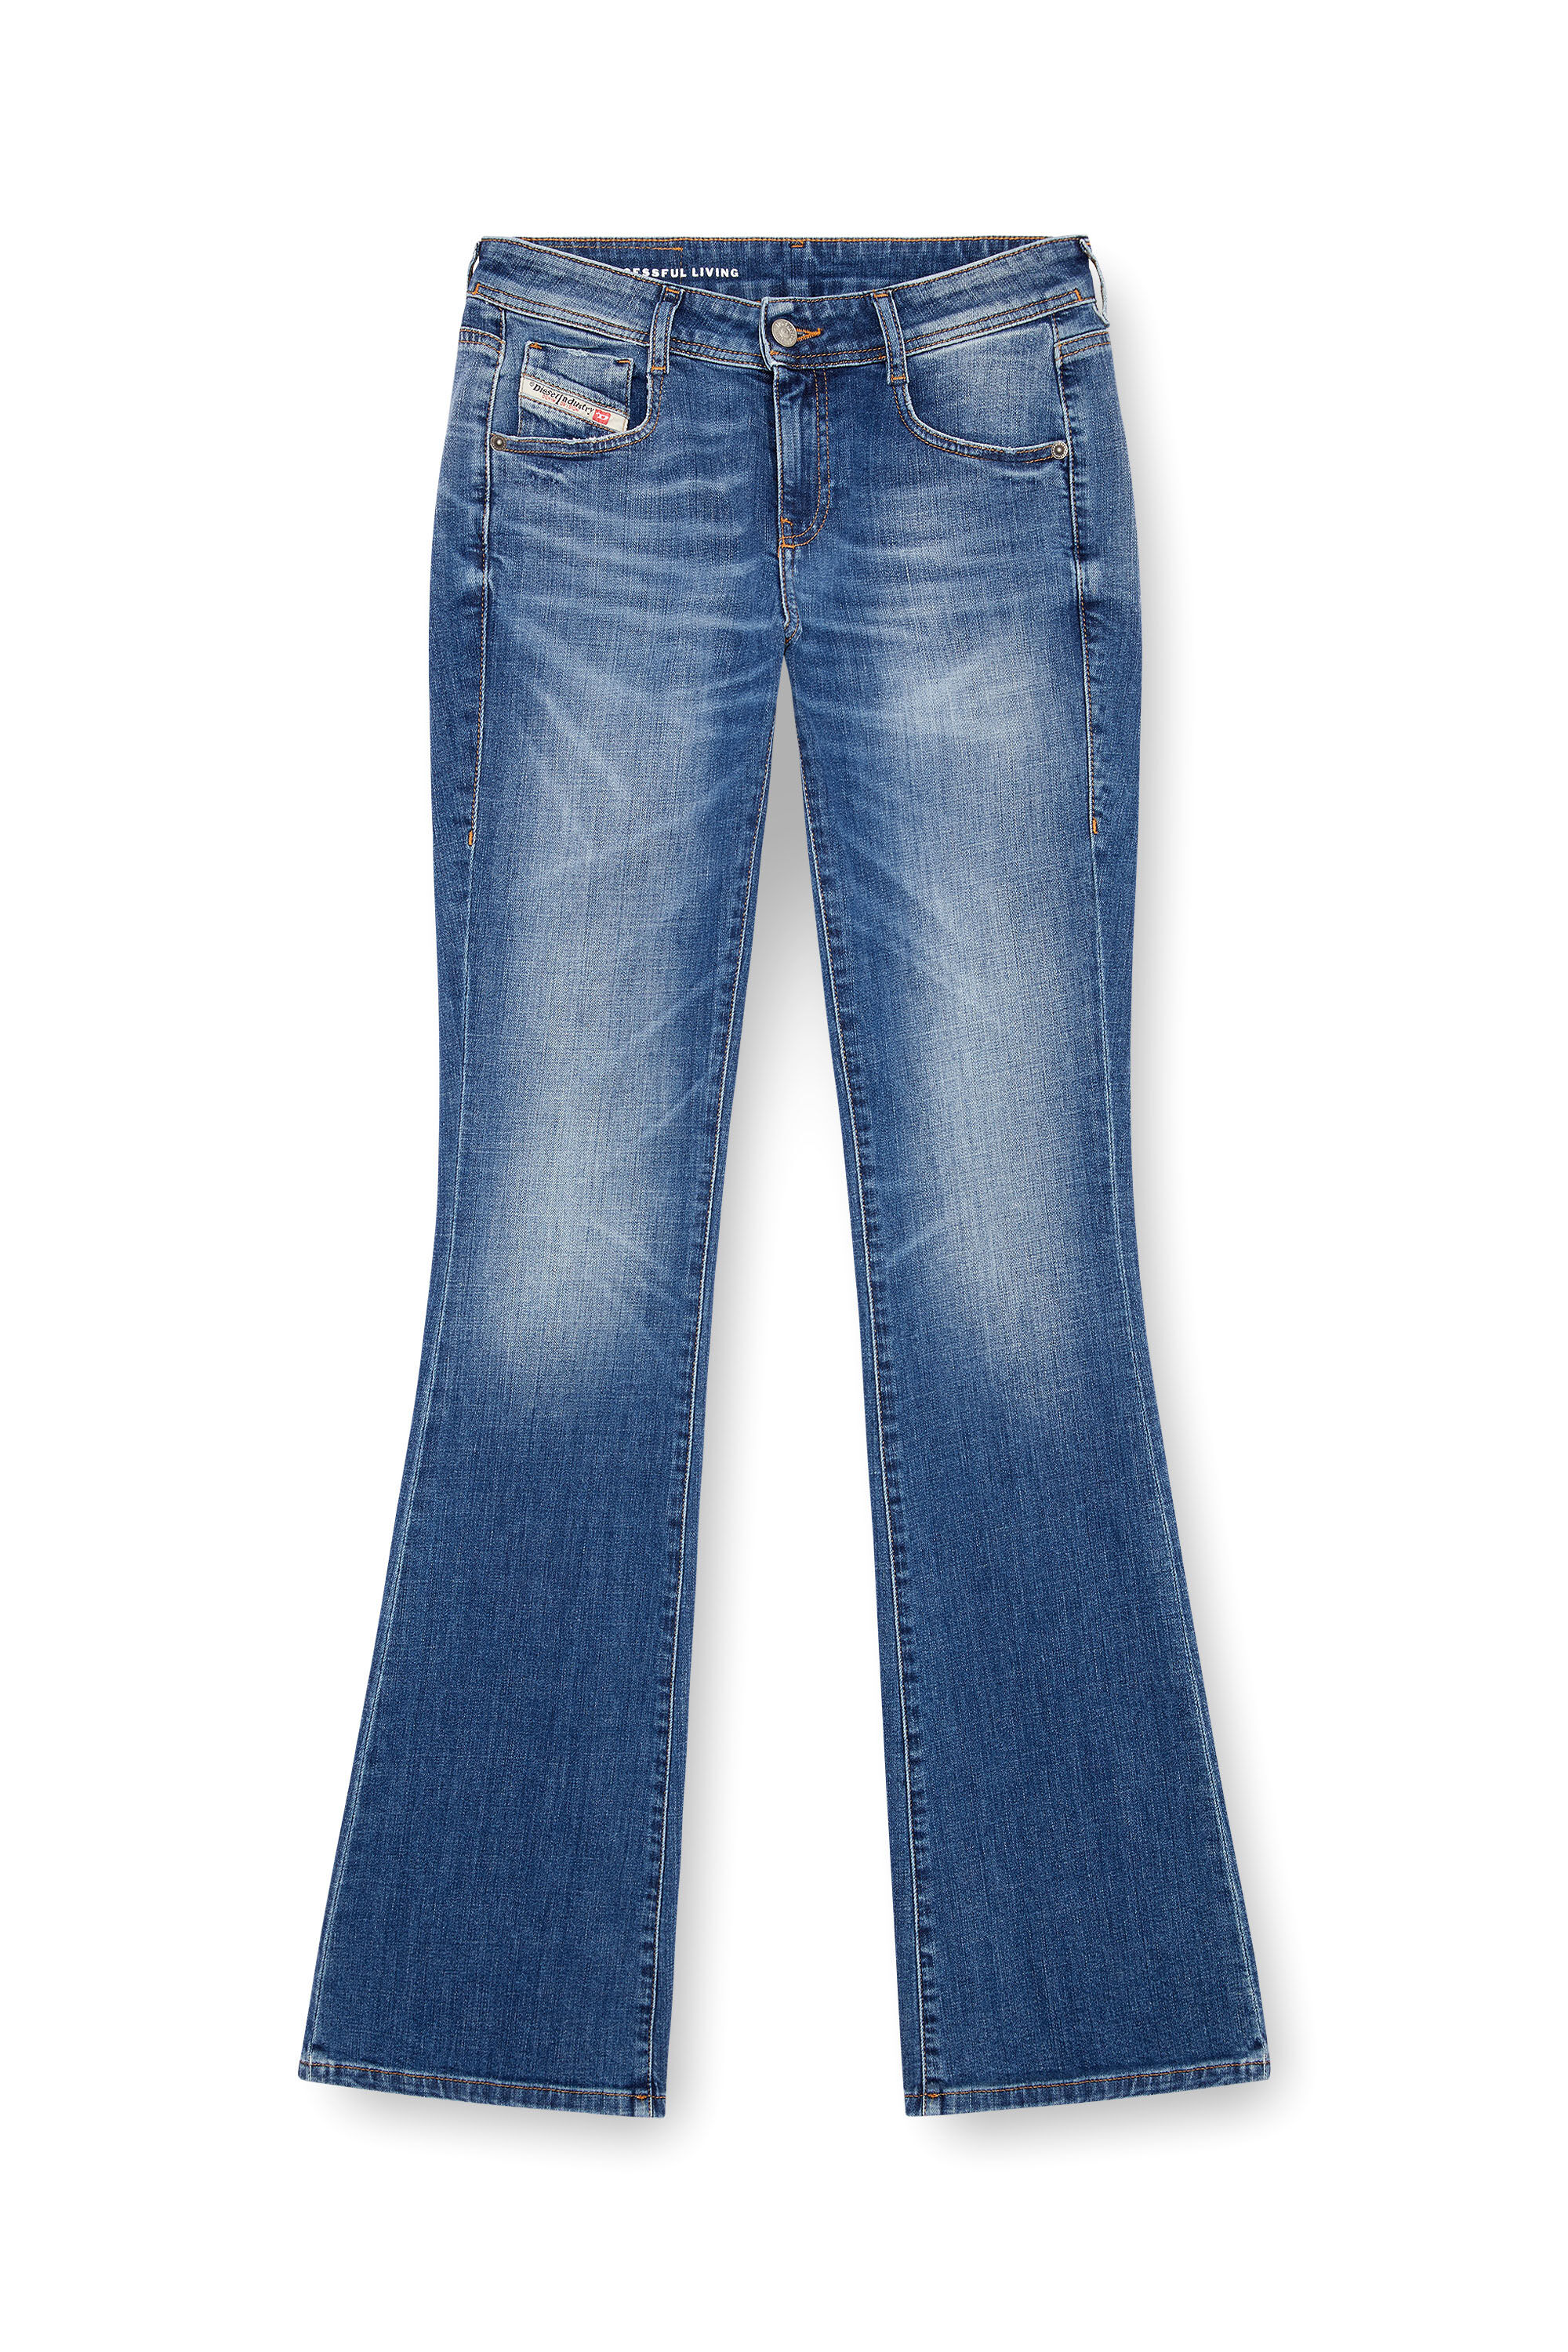 Diesel - Bootcut and Flare Jeans 1969 D-Ebbey 09J33, Mujer Bootcut y Flare Jeans - 1969 D-Ebbey in Azul marino - Image 2